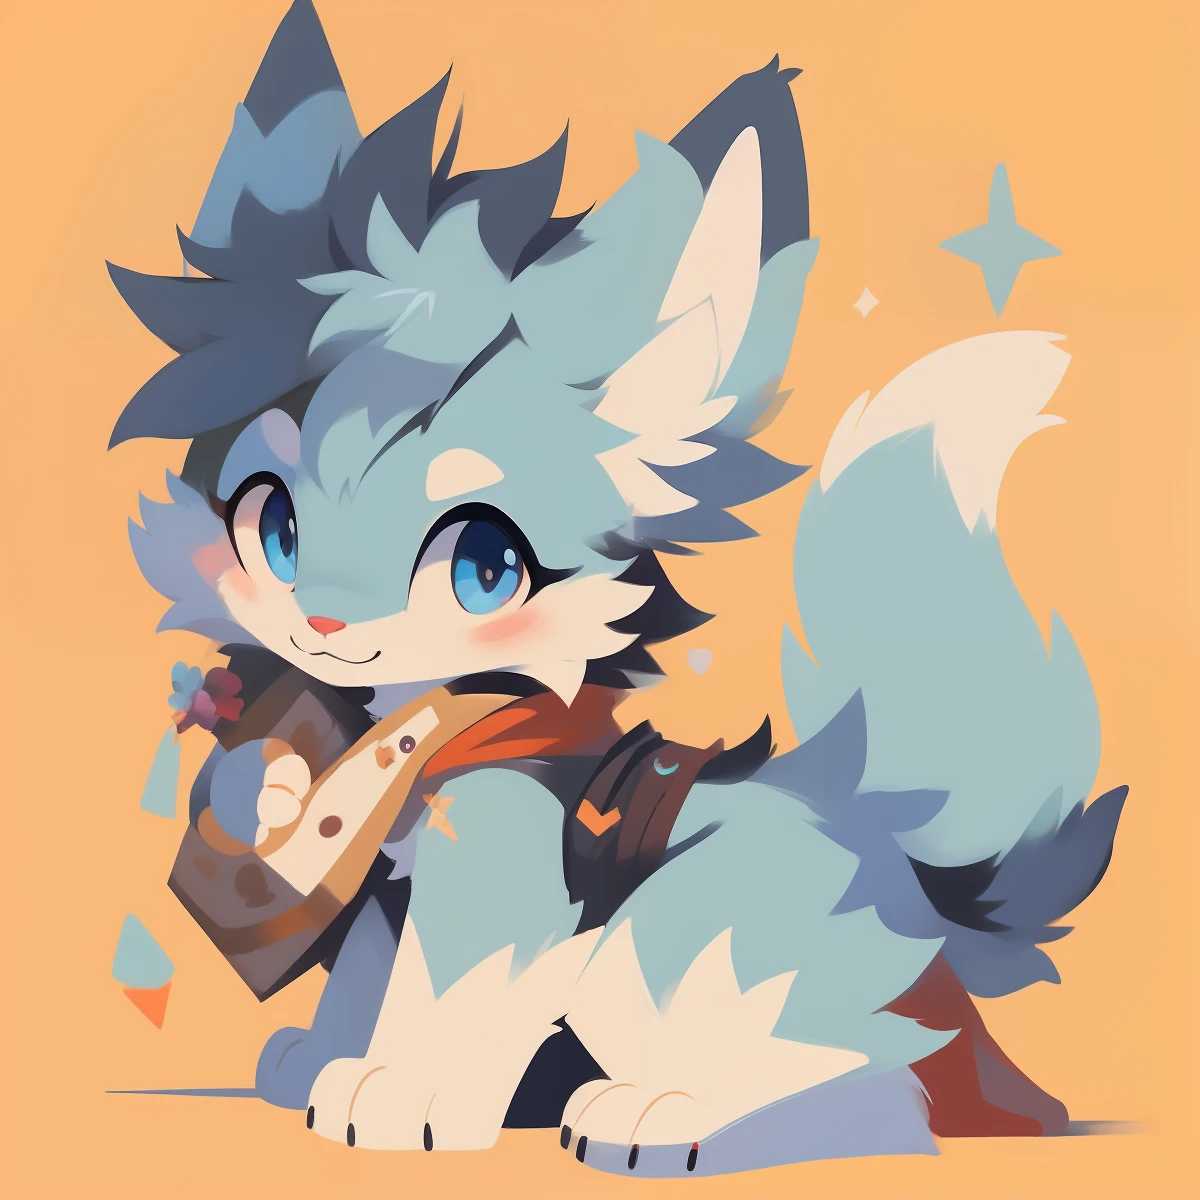 Anime- , fursona art, Furry art!!!, fursona!!!!, fursona furry art commission, fursona commission, cute character, furry fursona, Furry character, fox from league of legends chibi, very very beautiful furry art, commission on furaffinity, lineless, Furan Board: A cartoon cat with a blue tail and blue eyes，fursona!!!!, fursona art, furaffinity fursona, Sora as a cat, fursona commission, furraffinity, cute character, anime cat, tchibi, furry fursona, Cartoon Cute, lineless，The soft，hairy pubic！！